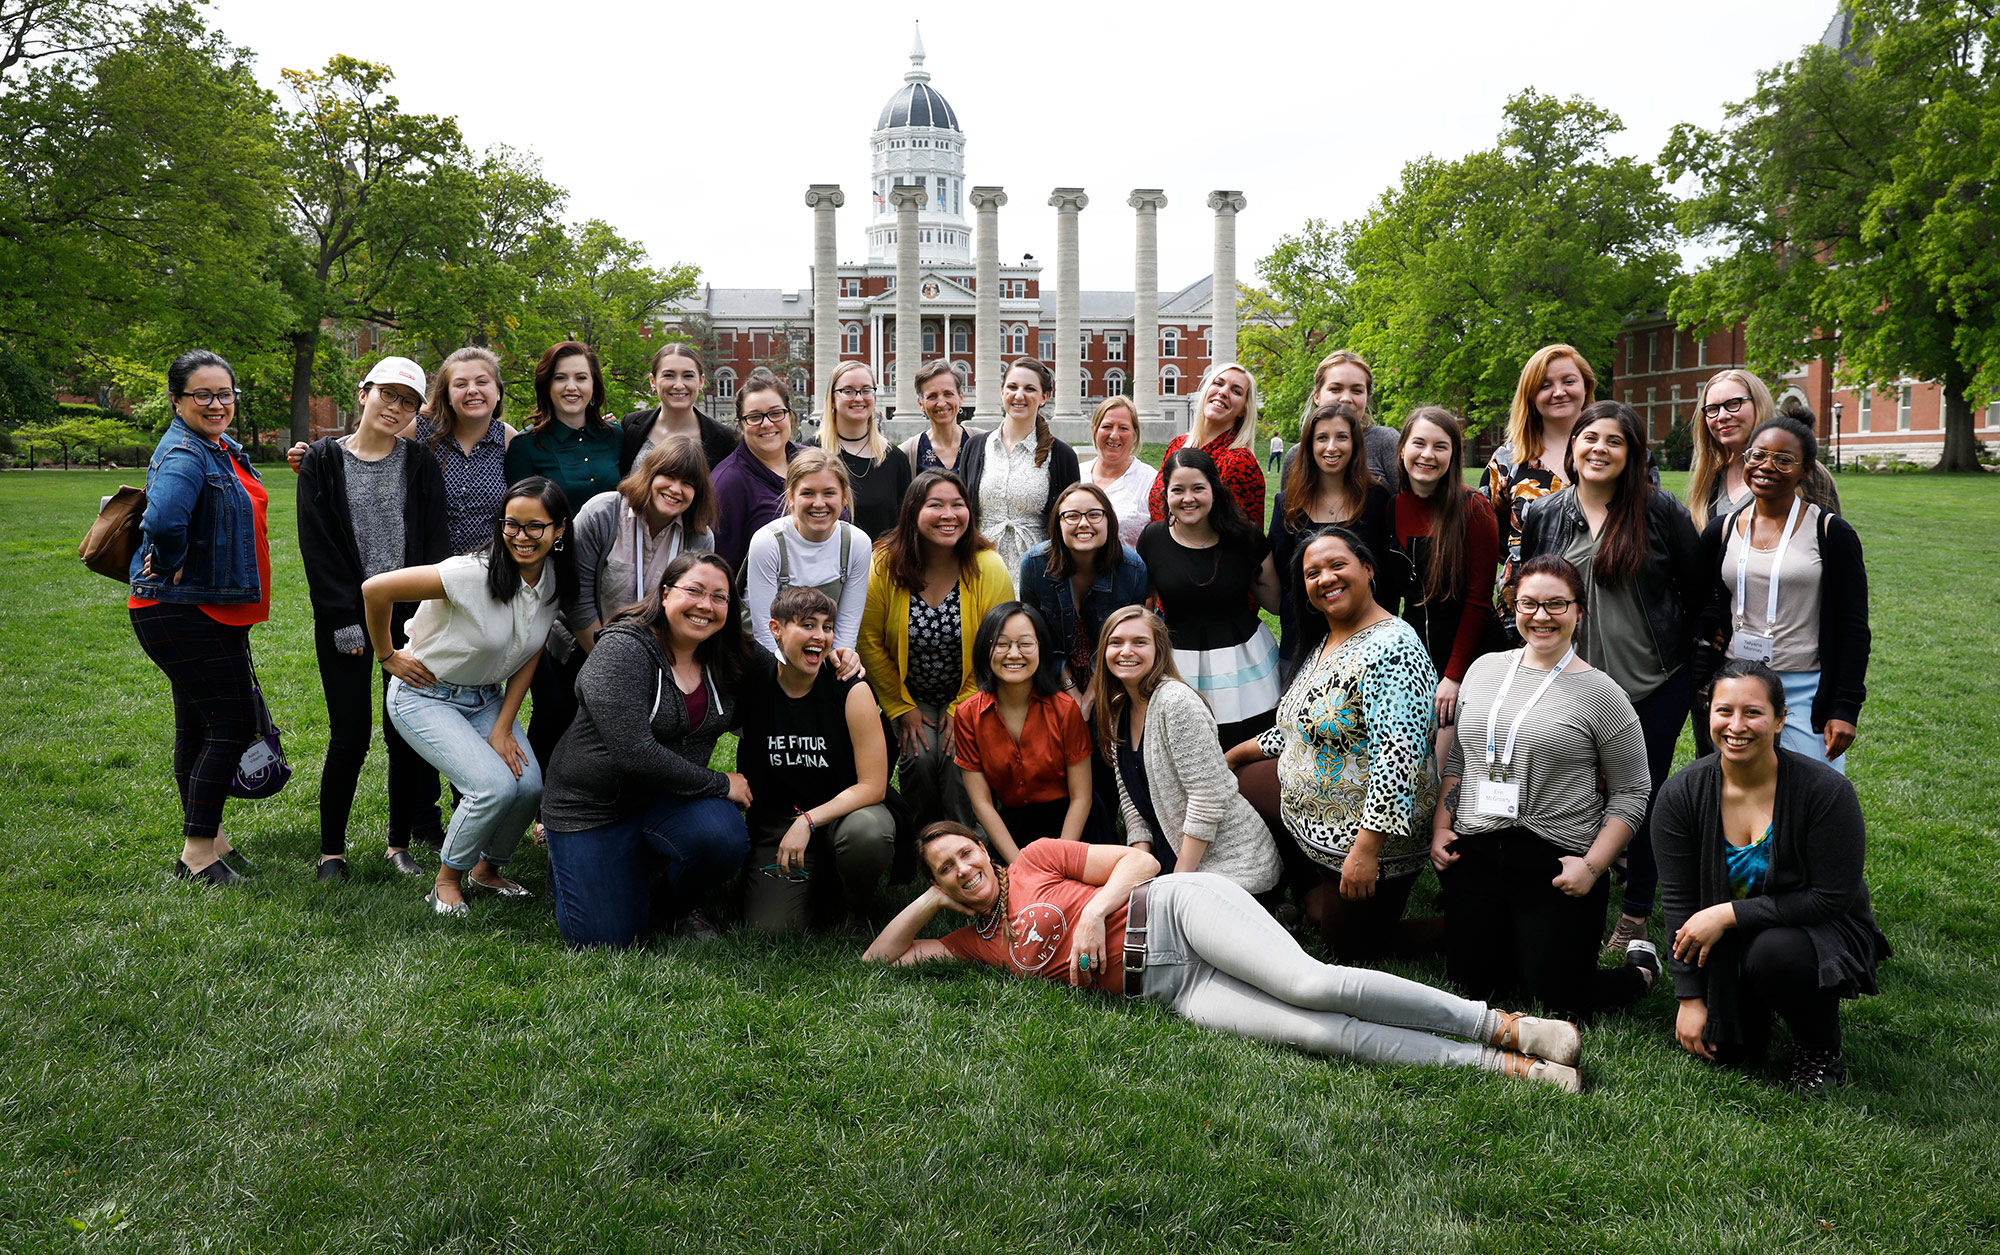 The 2019 Women in Journalism Workshop attendees and session leaders.